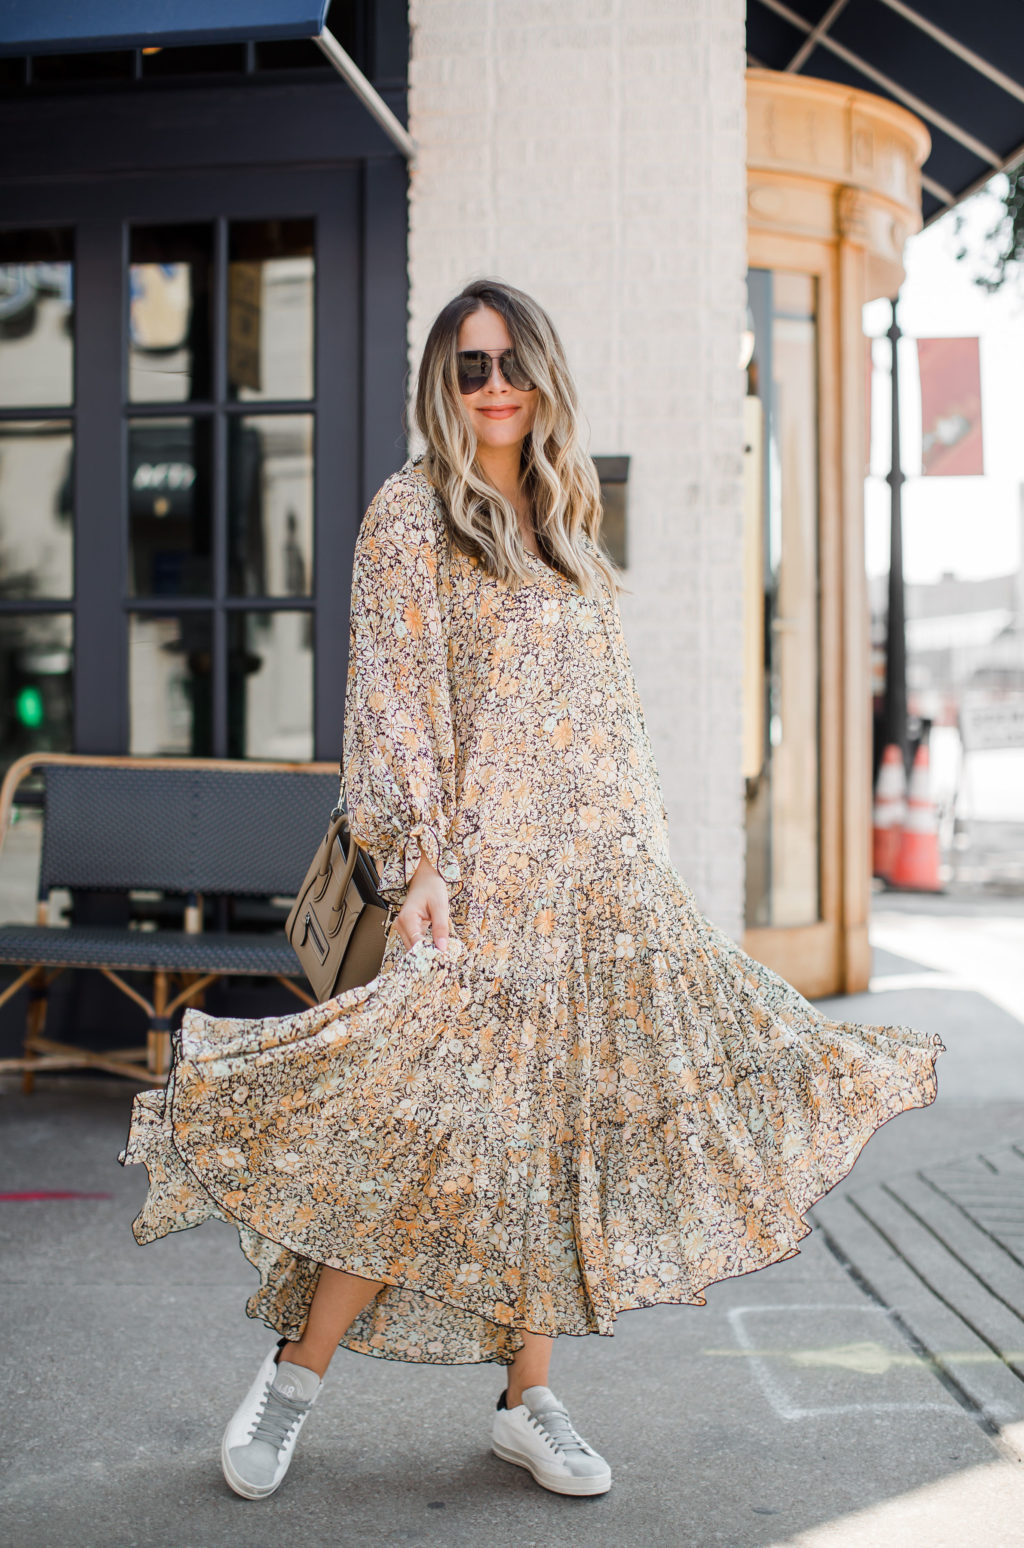 Maxi dress with sneakers